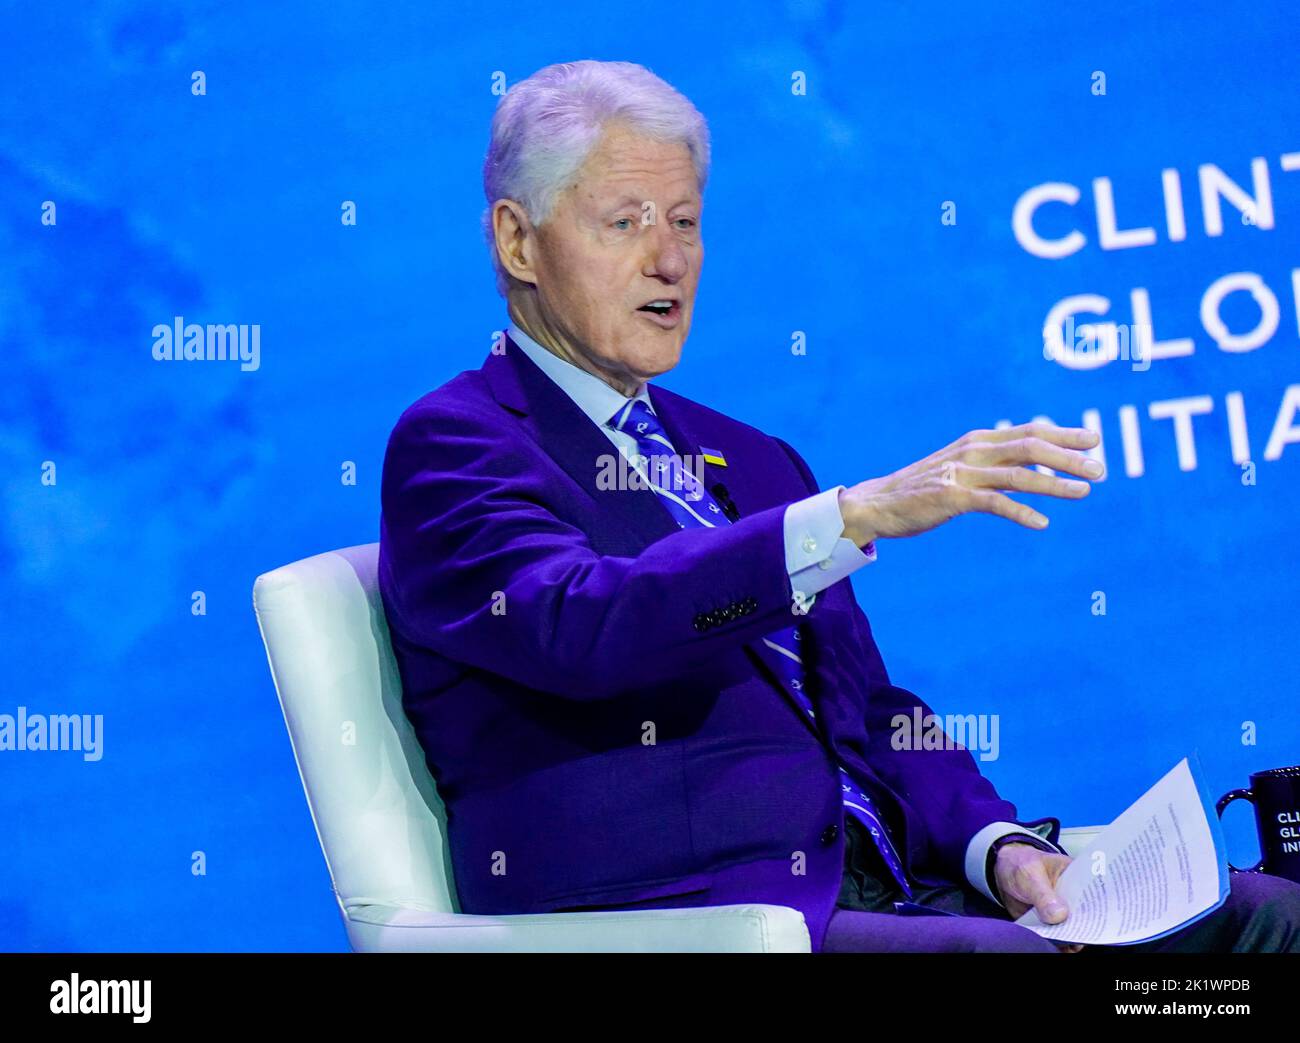 09/20/2022 New York City, New York Bill Clinton during the 2022 Clinton Global Initiative held at Hilton Midtown Tuesday September 20, 2022 in New York City. Photo by Jennifer Graylock-Alamy News 917-519-7666 Stock Photo